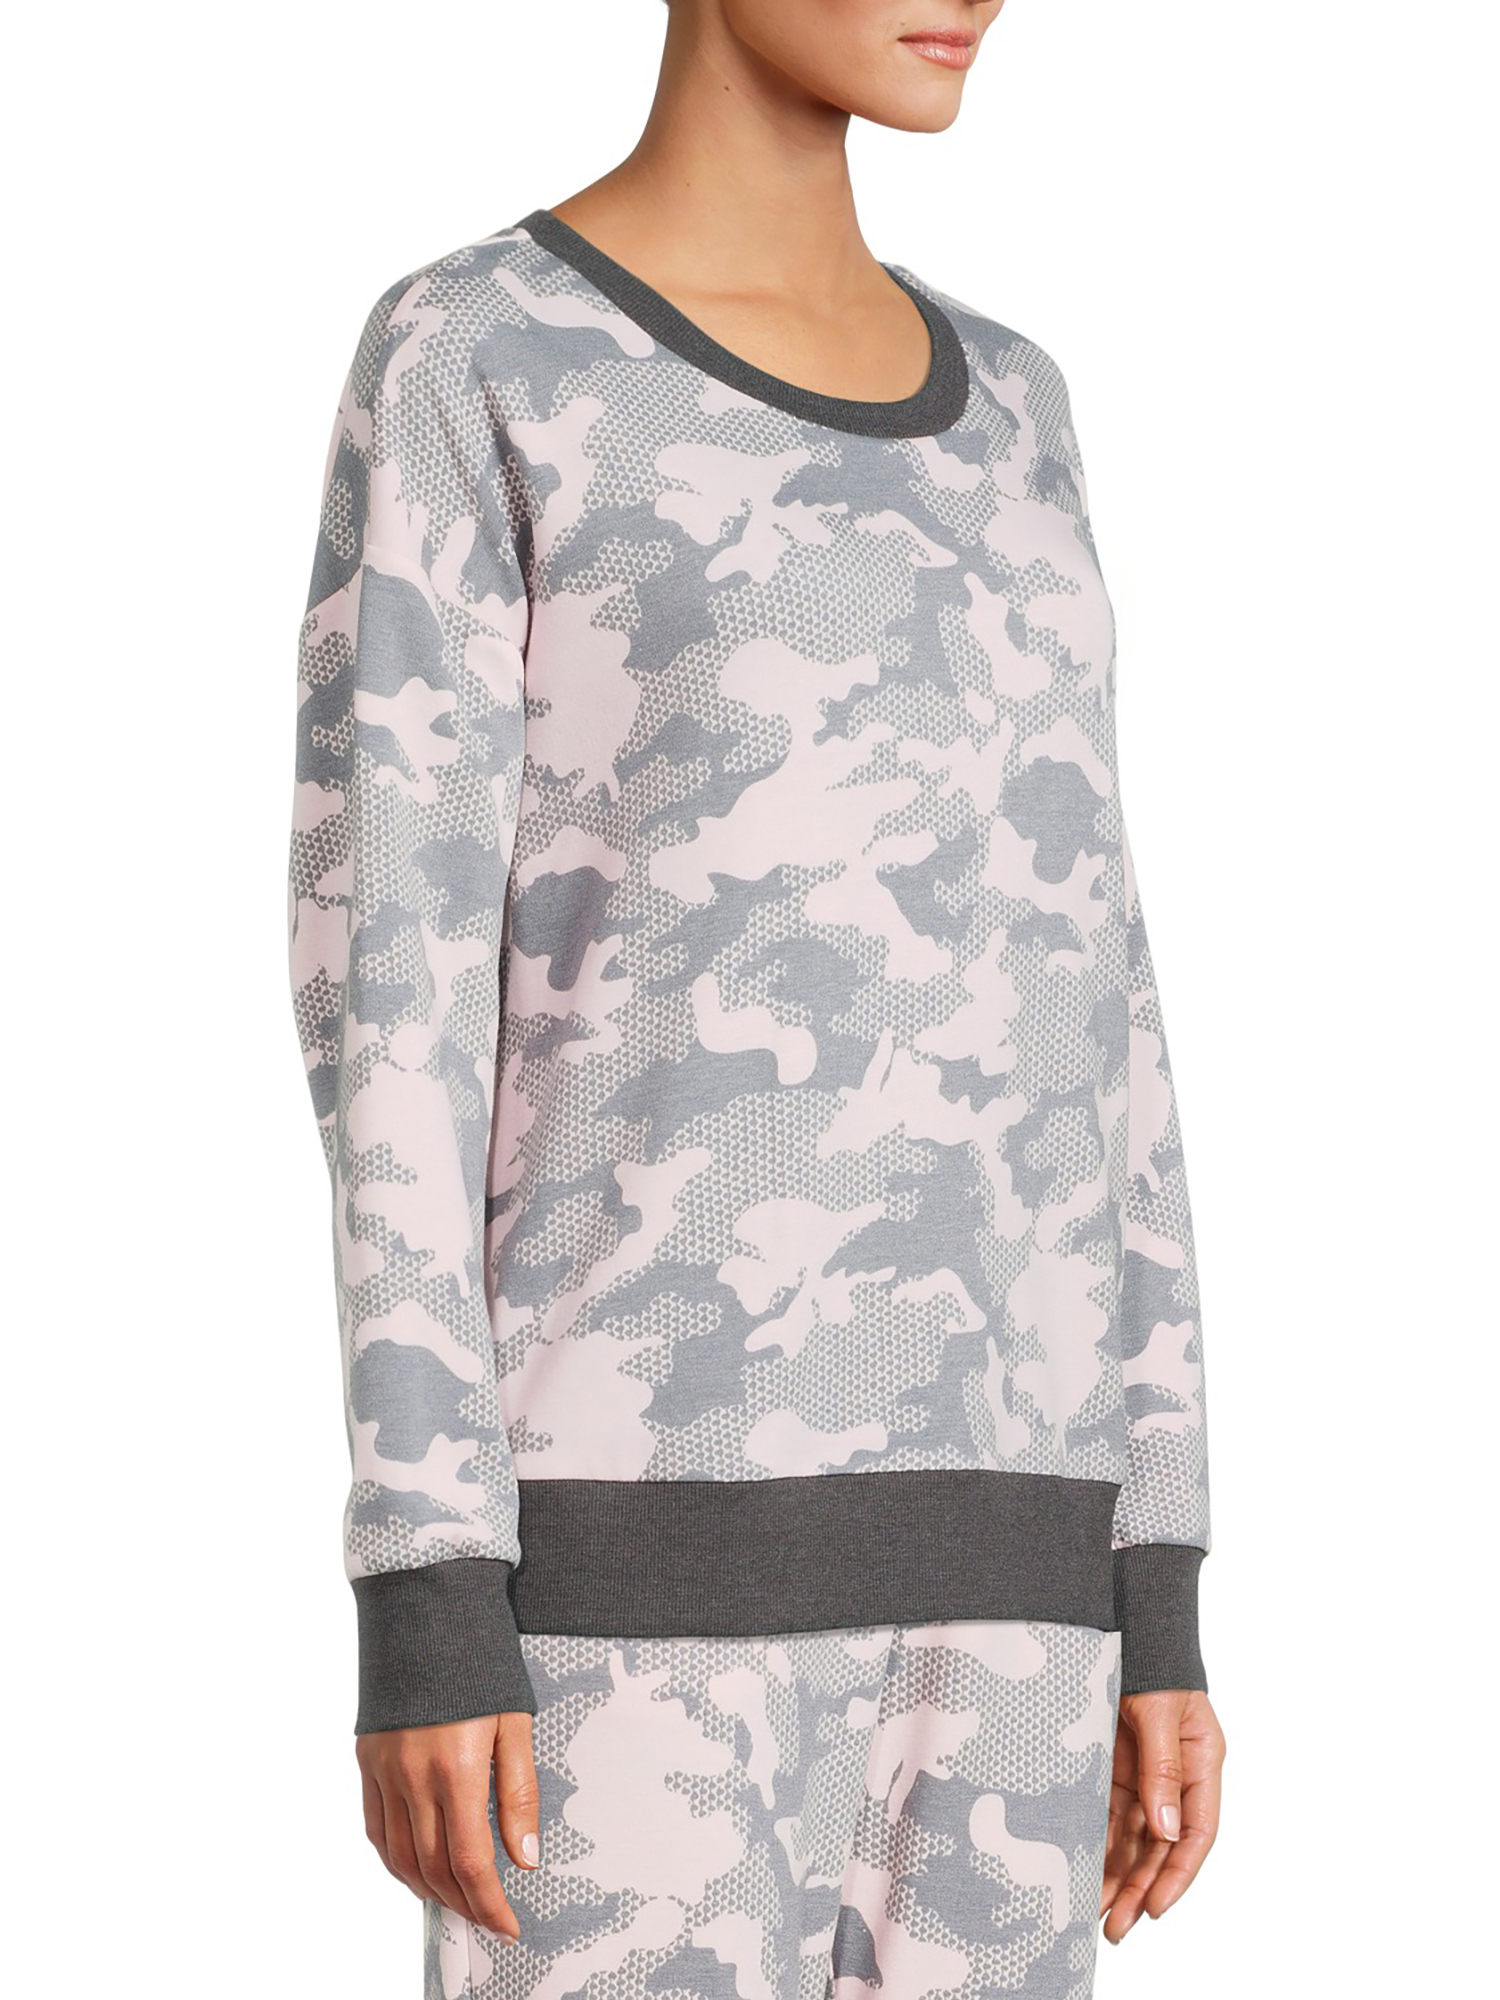 Reebok Long Sleeve Pullover Relaxed Fit Sweatshirt (Women's) 1 Pack - image 3 of 6